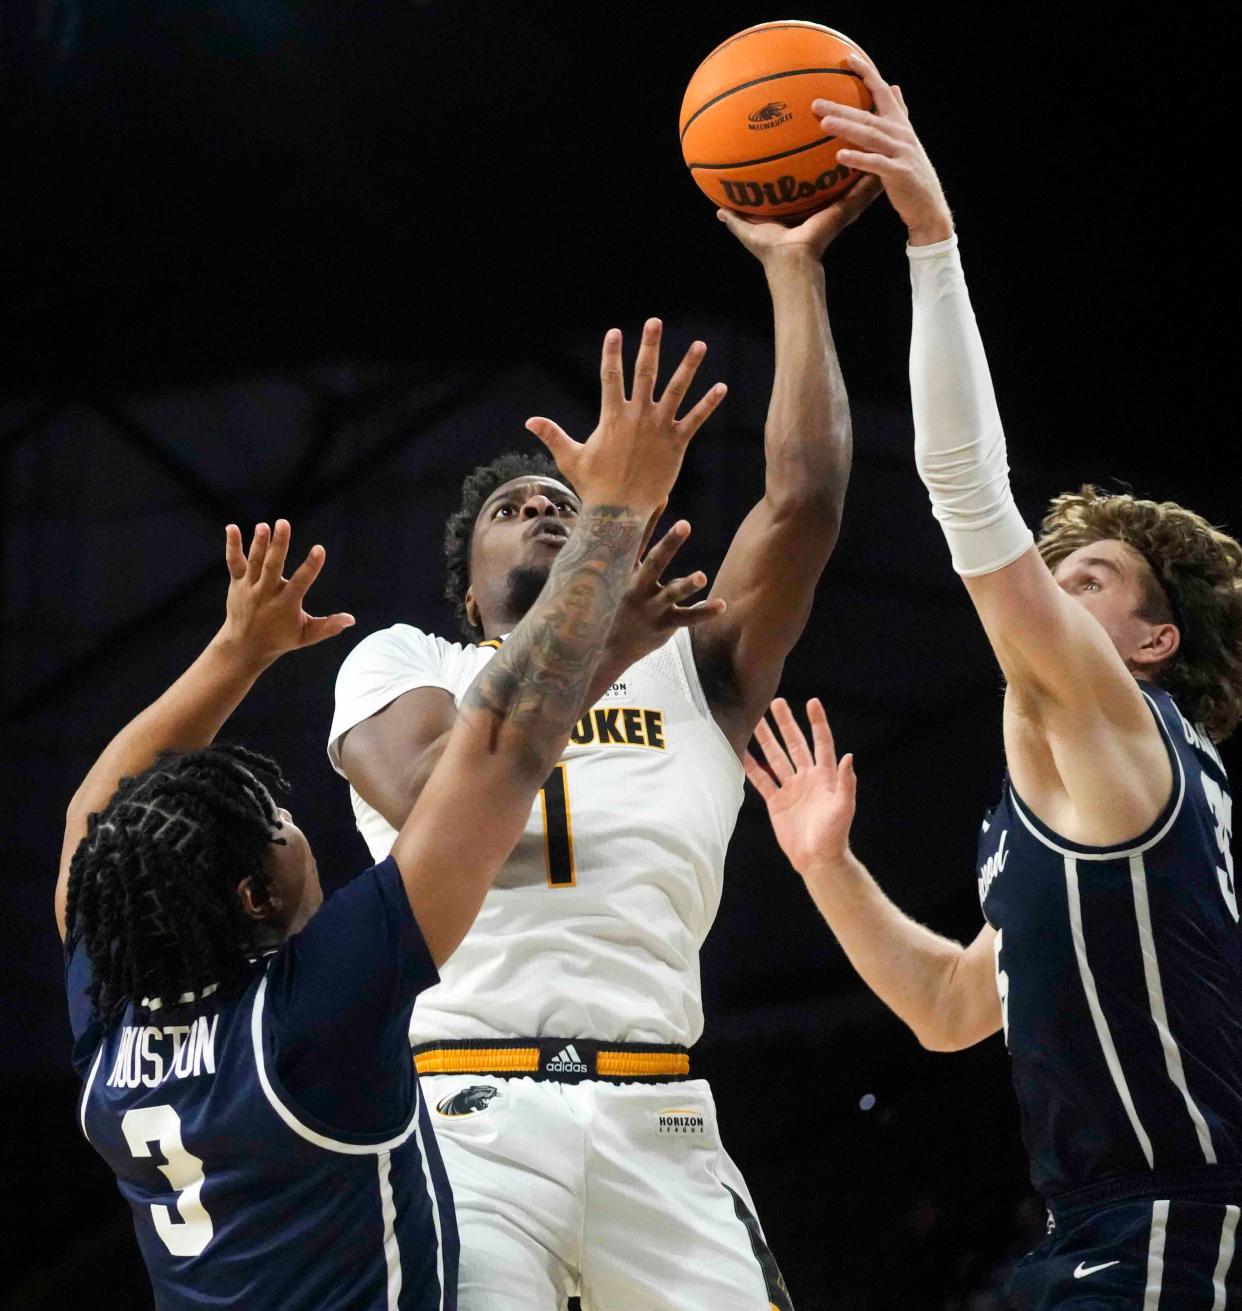 Junior guard Markeith Browning II has been dismissed from UWM's men's basketball team.